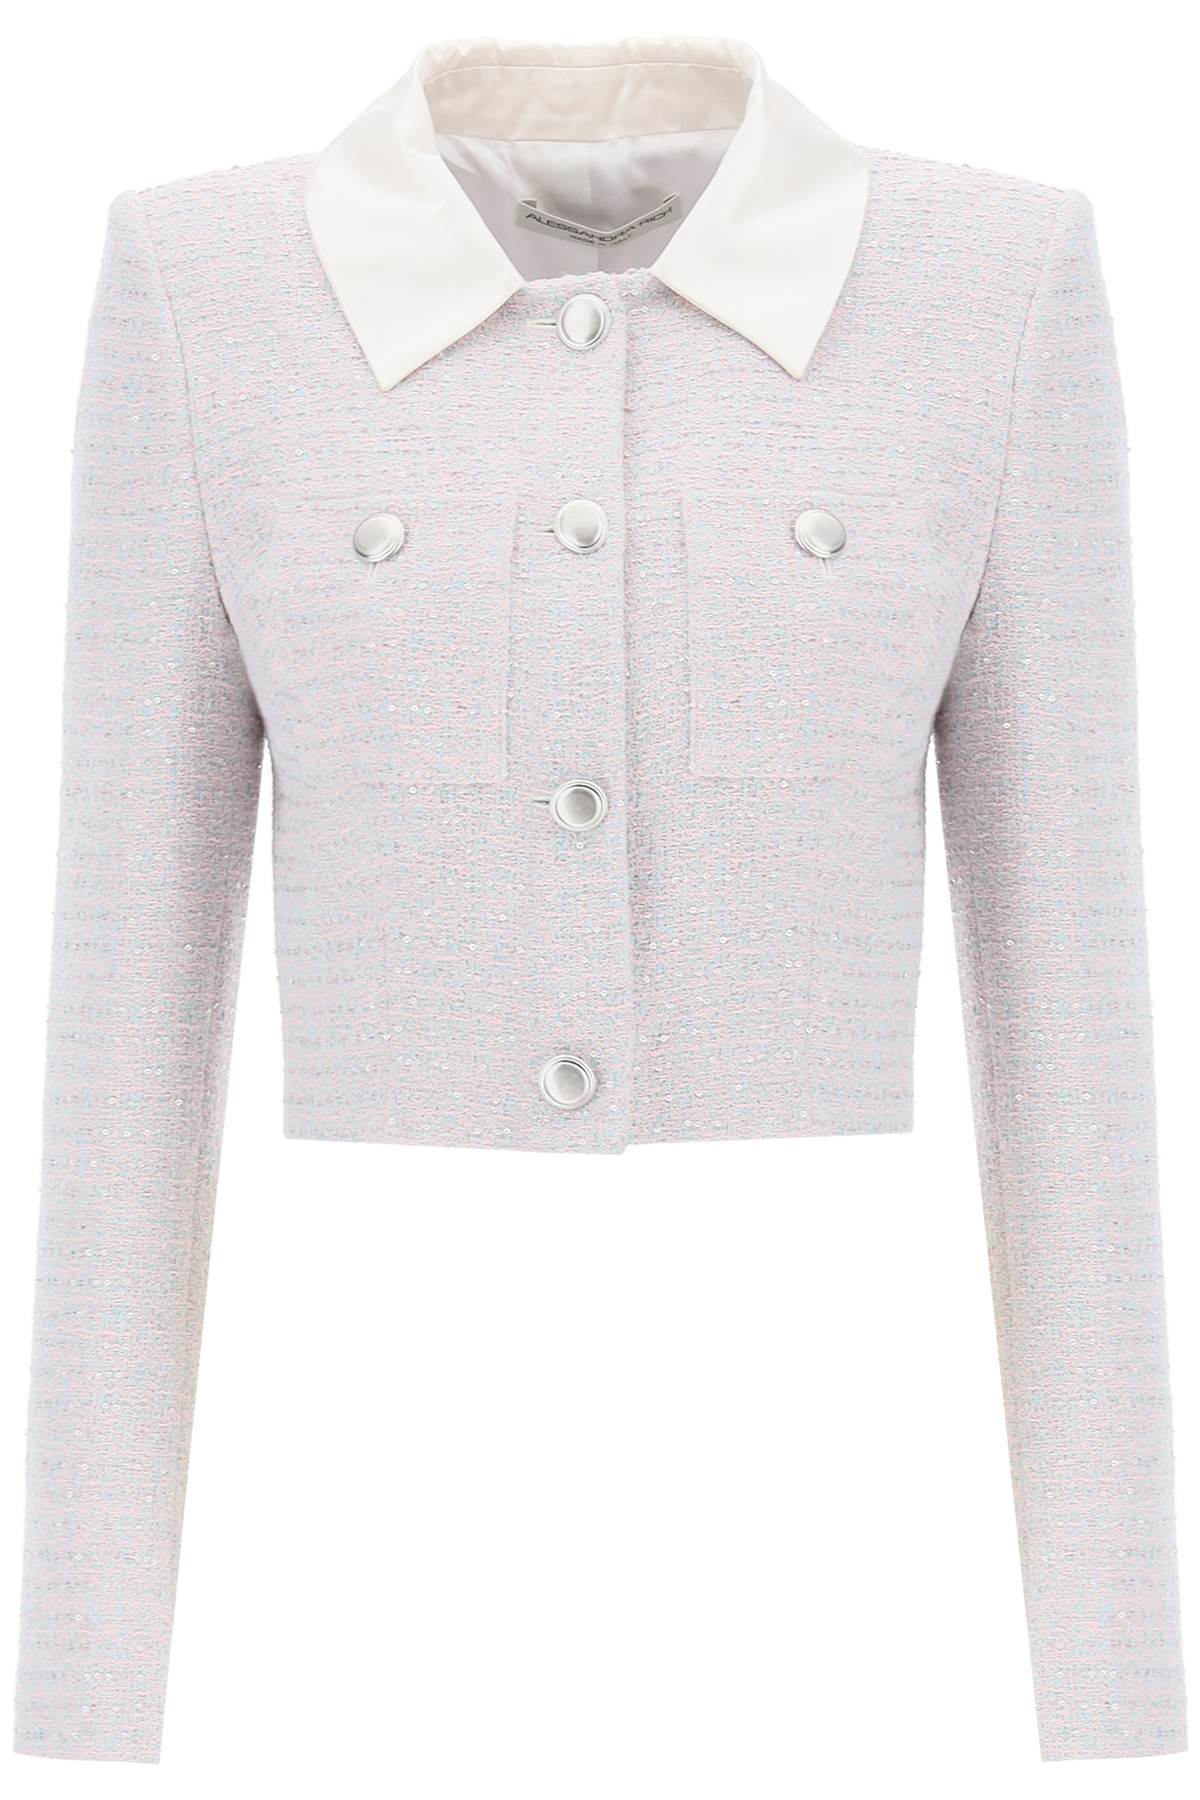 Alessandra rich cropped jacket in tweed boucle'-women > clothing > jackets > casual jackets-Alessandra Rich-40-Mixed colours-Urbanheer